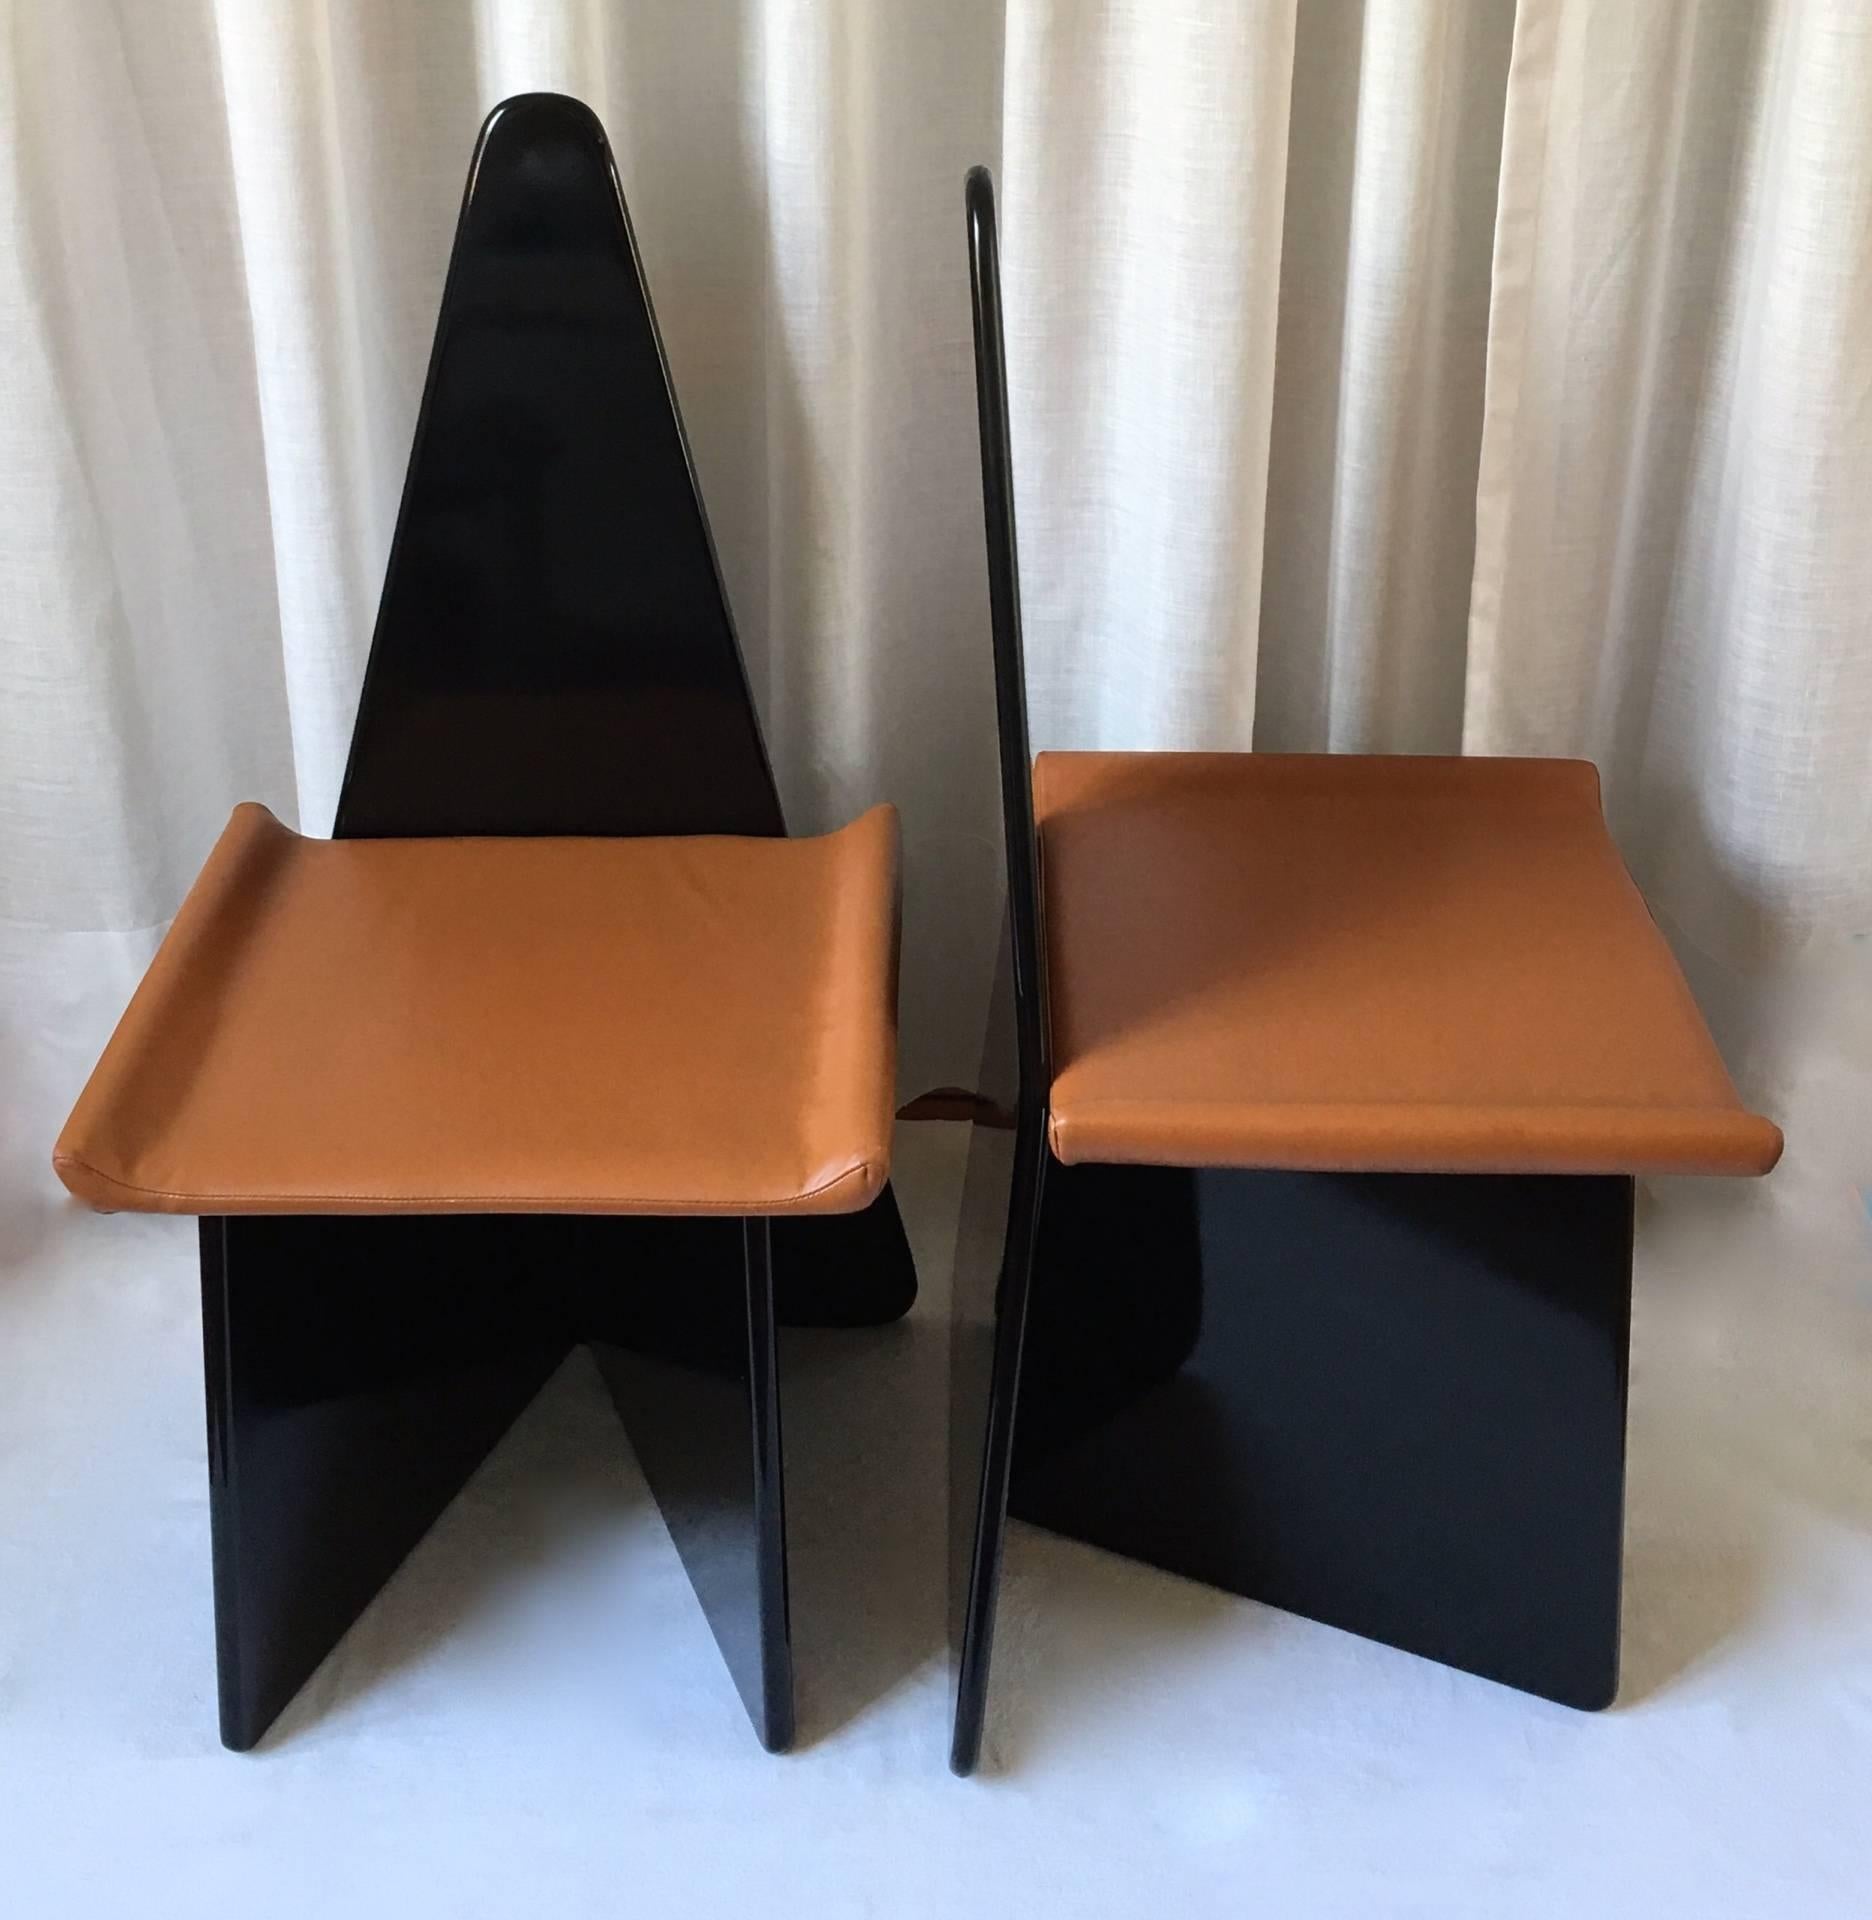 Post-Modern Rare Pair of Post Modern Claudio Salocchi Chairs For Sale